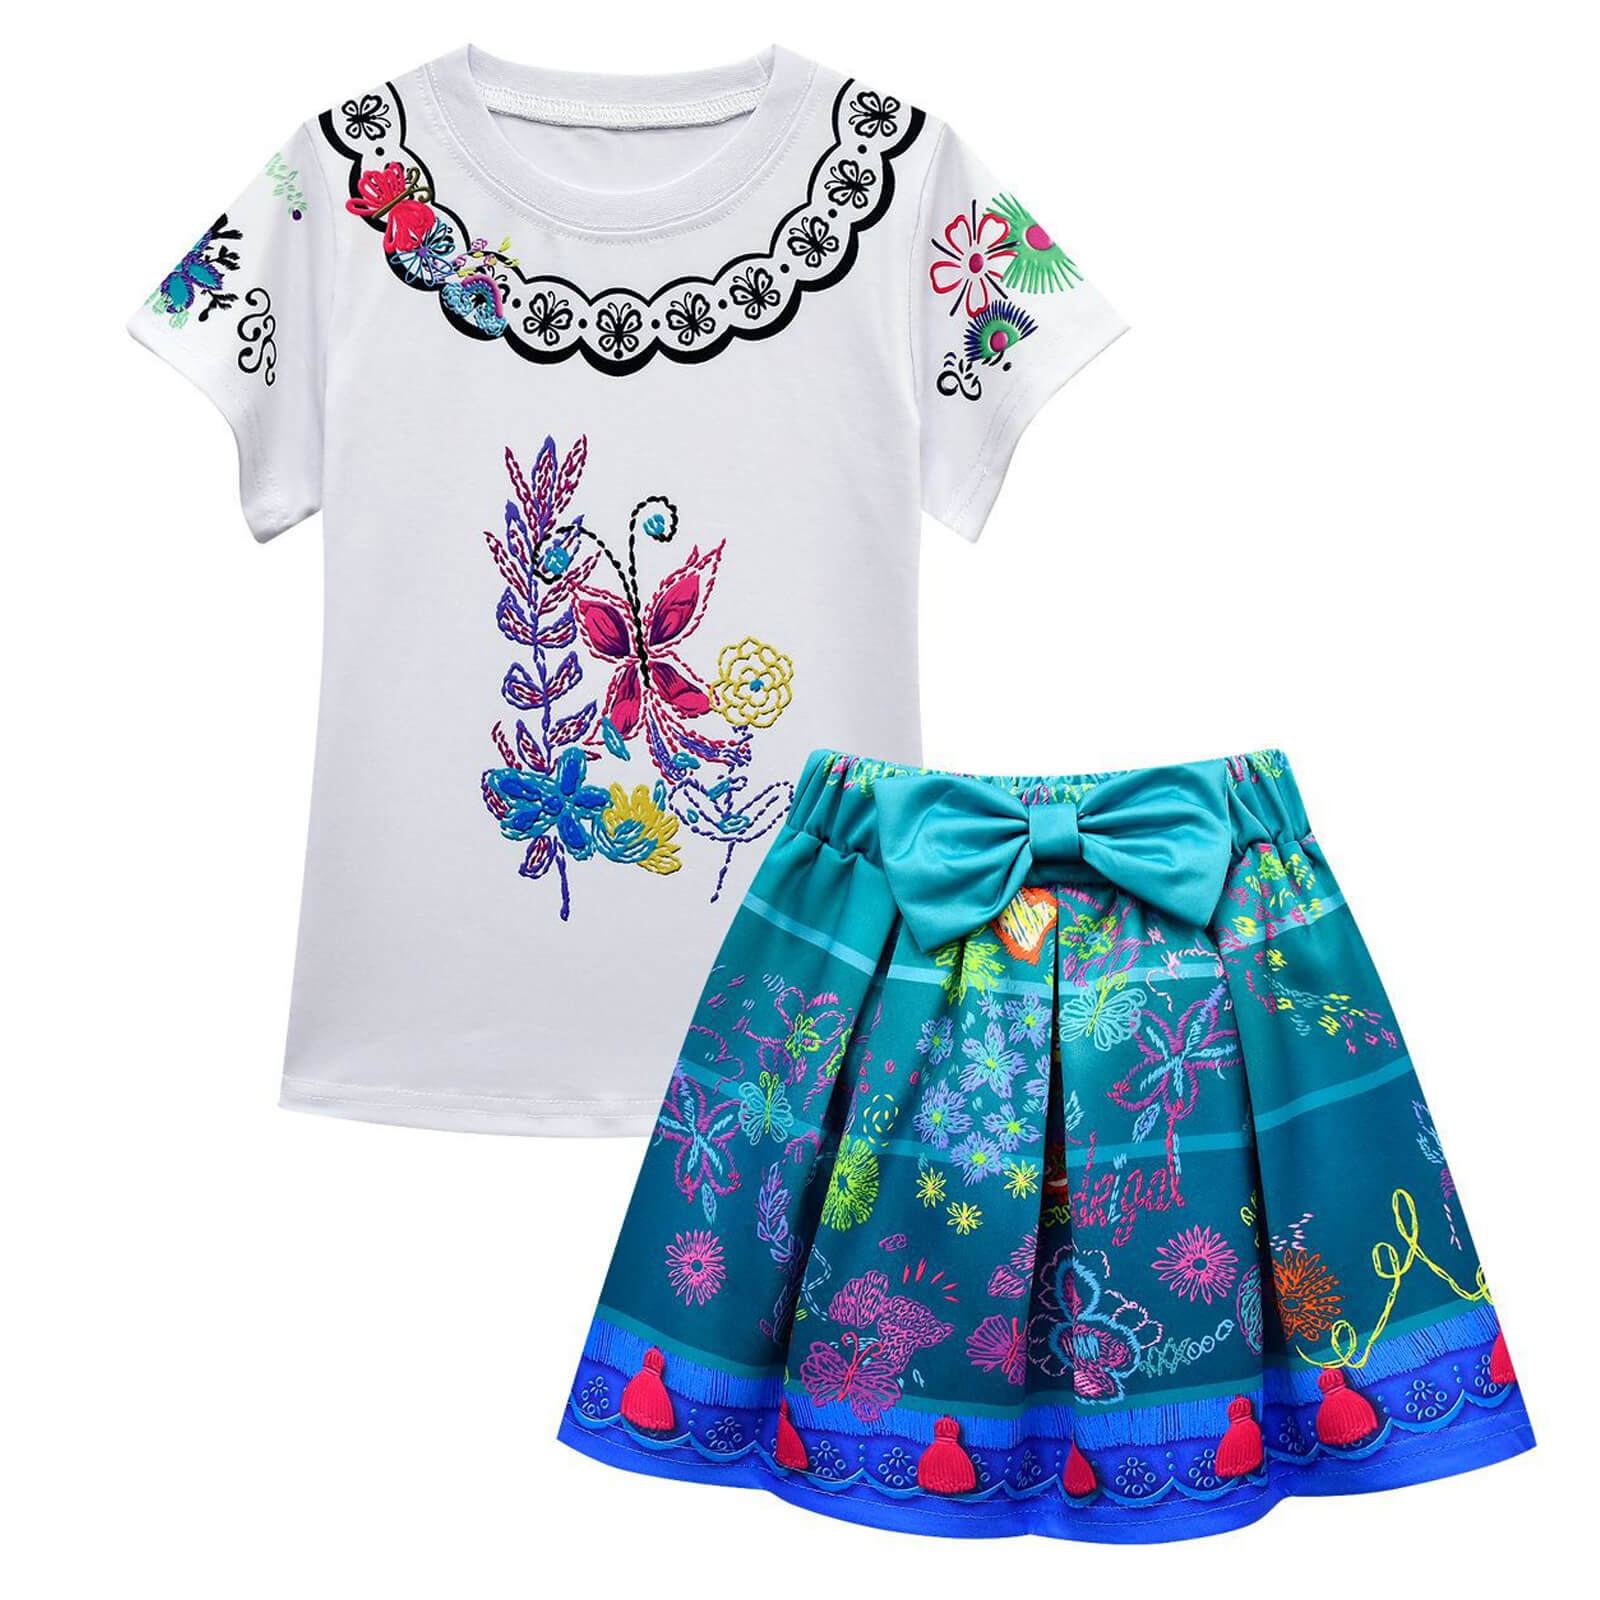 Mirabel Cosplay Costume T-shirt and Skirt with Bag For Girls Age 3 and UP